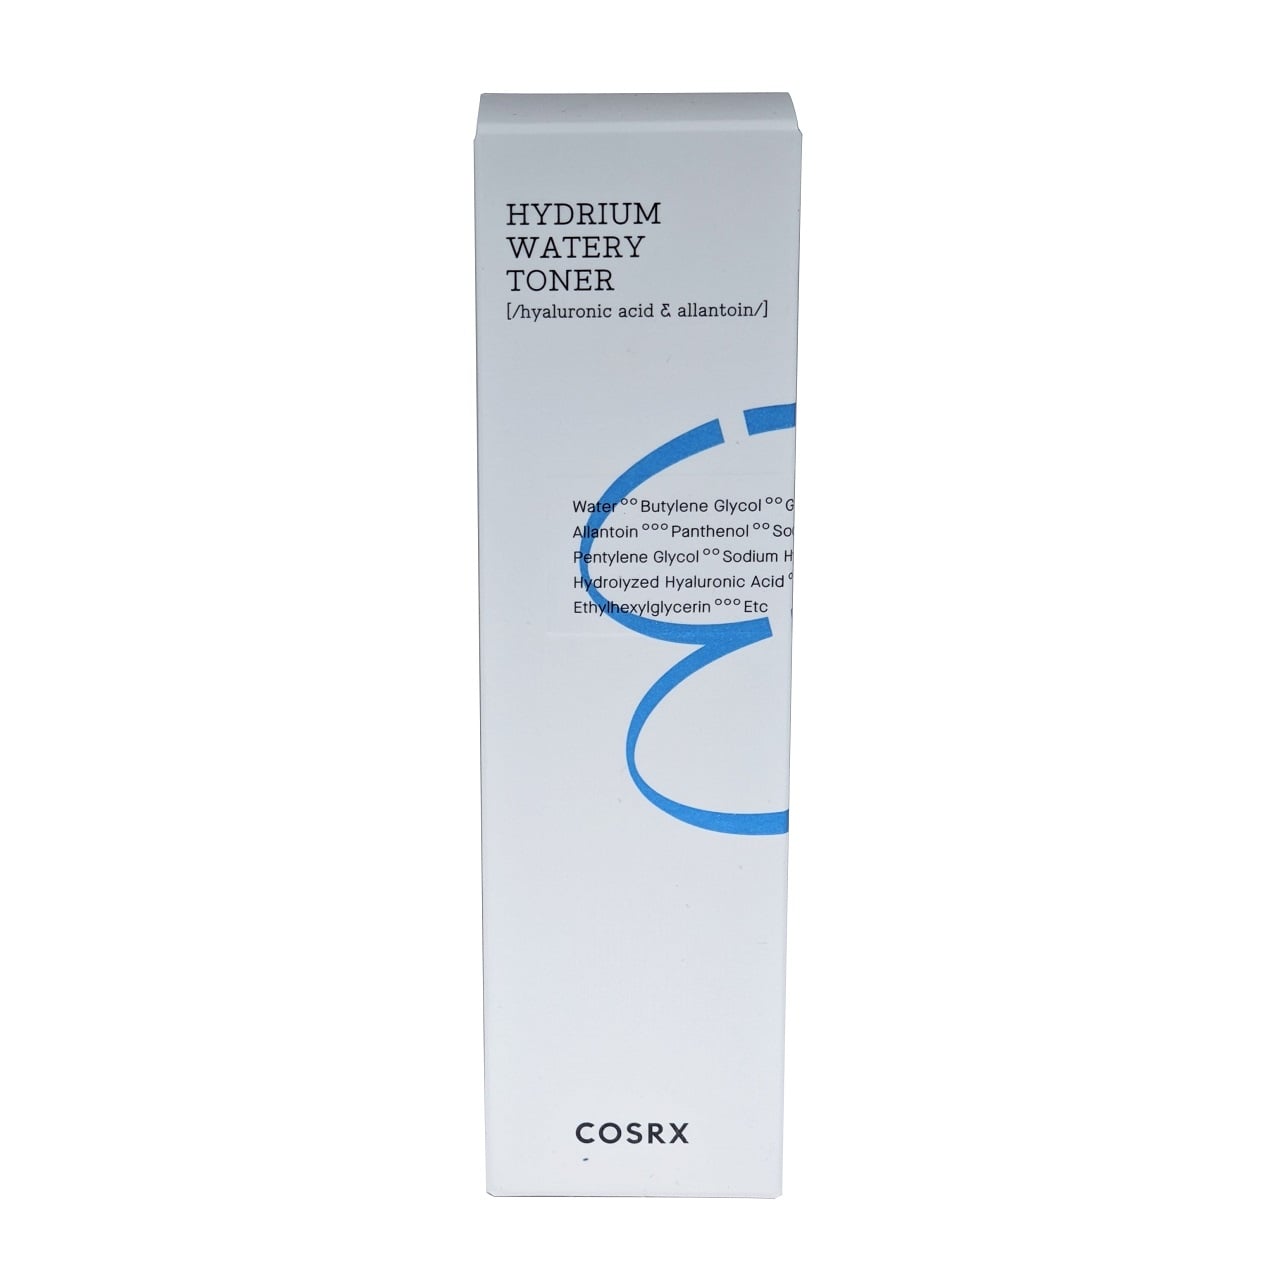 Product label for COSRX Hydrium Watery Toner